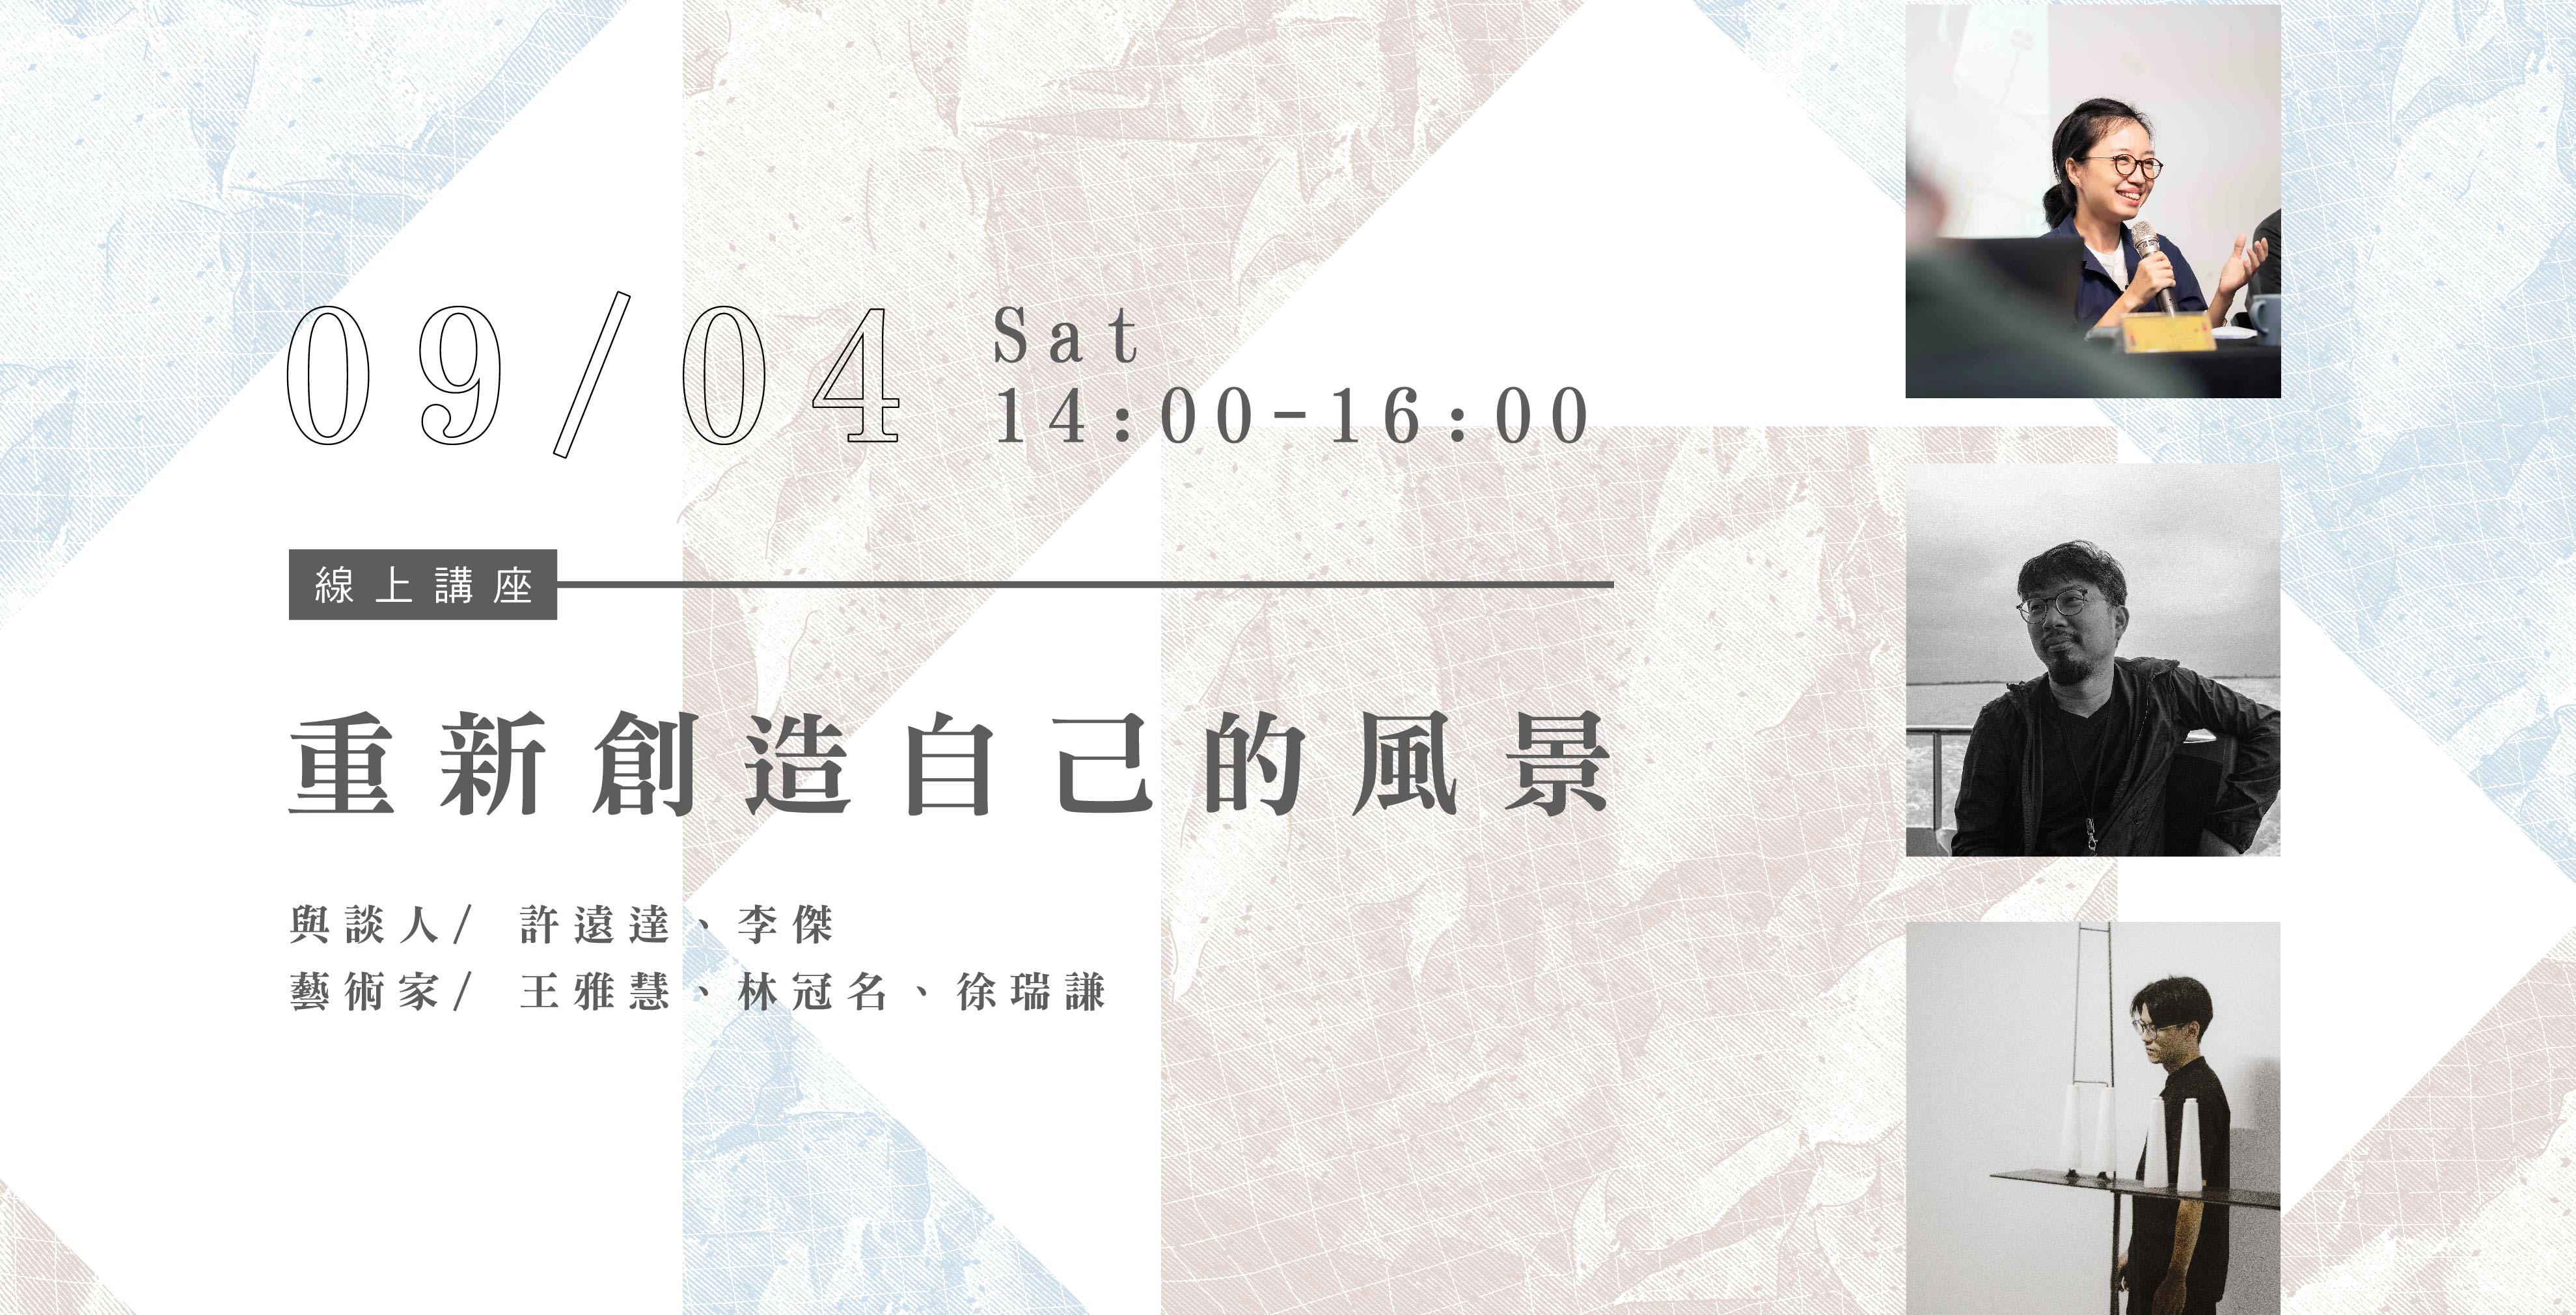 【Online Talk】Re-create the Landscape of One’s Own